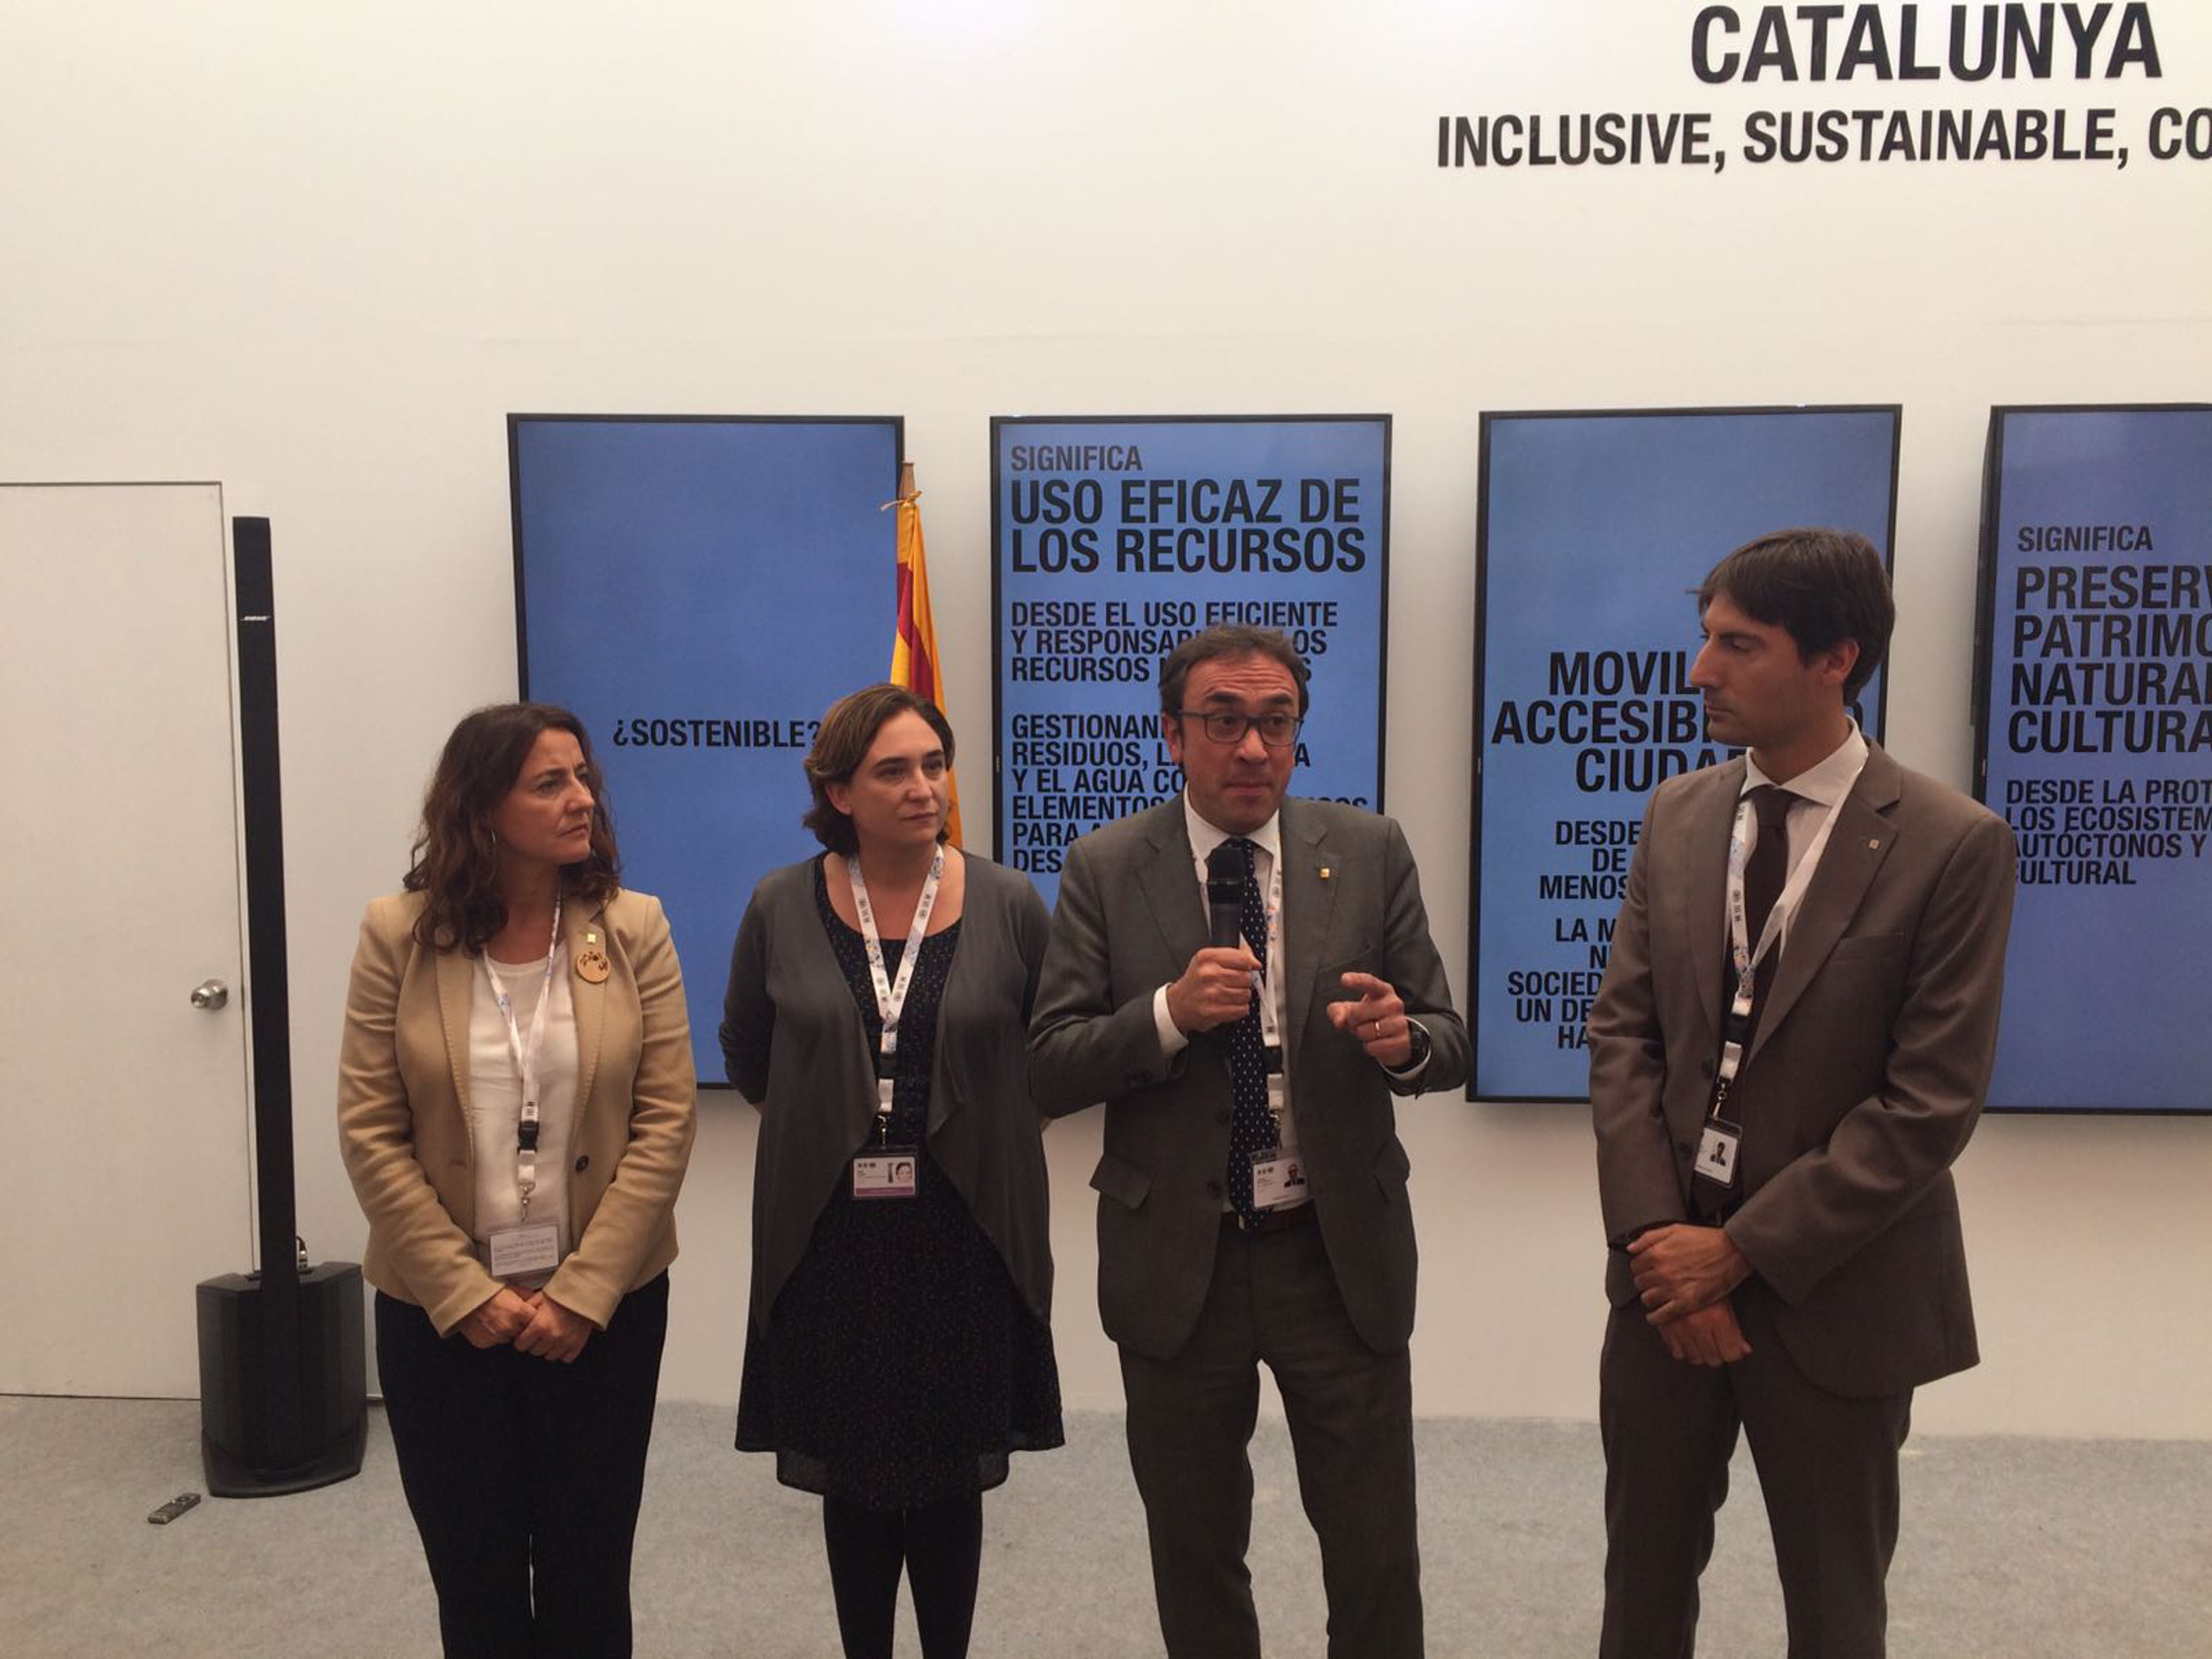  From left to right, the President of Barcelona Provincial Government, Mercè Conesa, the Mayor of Barcelona, Ada Colau; the Catalan Minister for Planning and Sustainability, Josep Rull; and the Catalan Secretary for Foreign Affairs, Jordi Solé, at Habitat